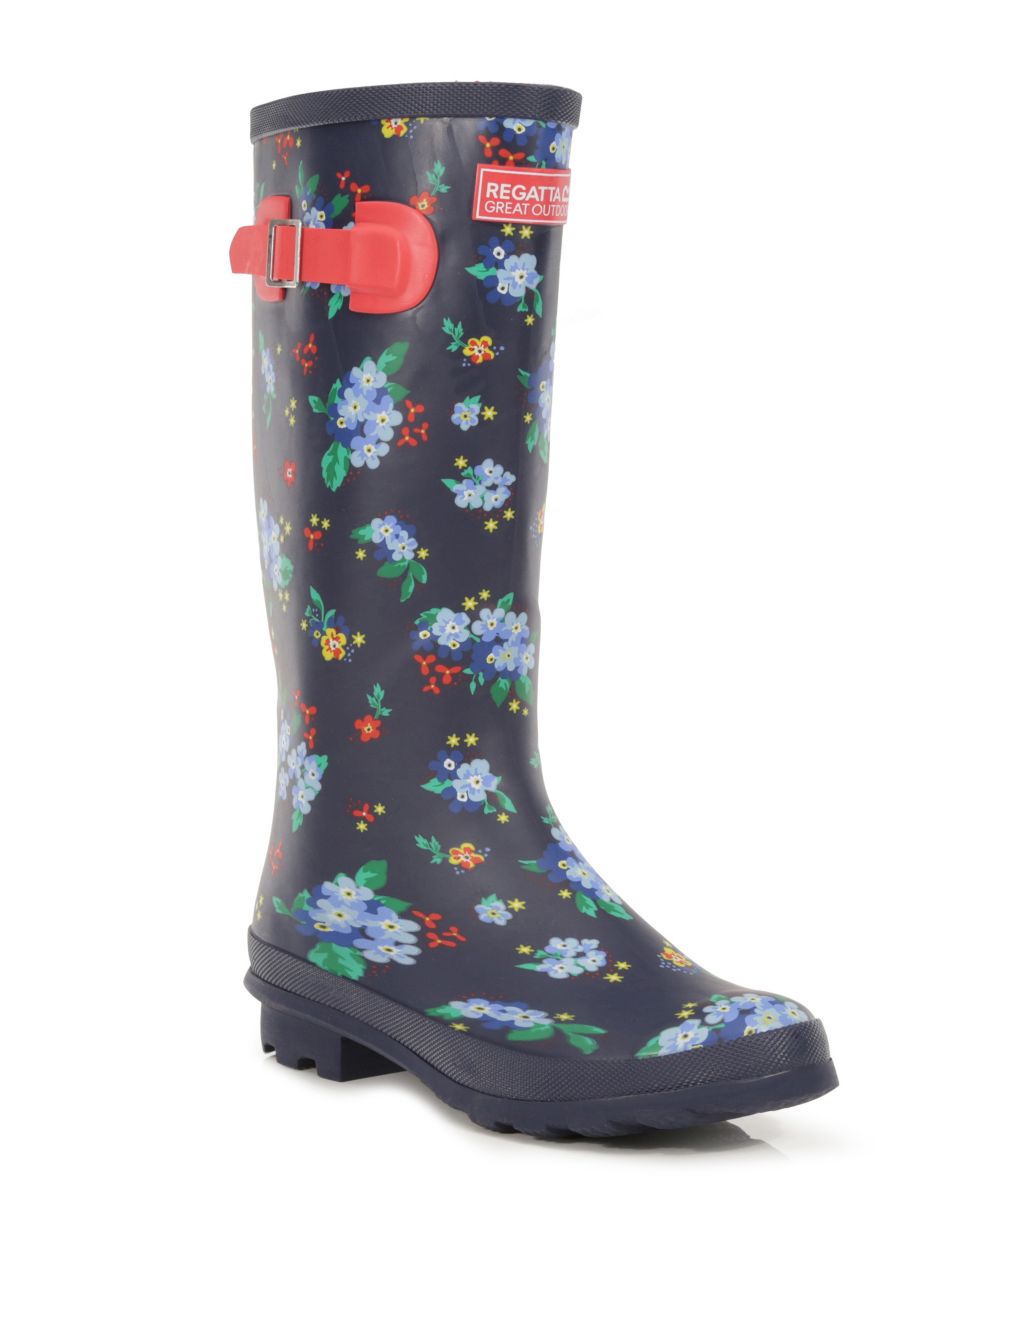 Lady Fairweather II Patterned Wellies image 2